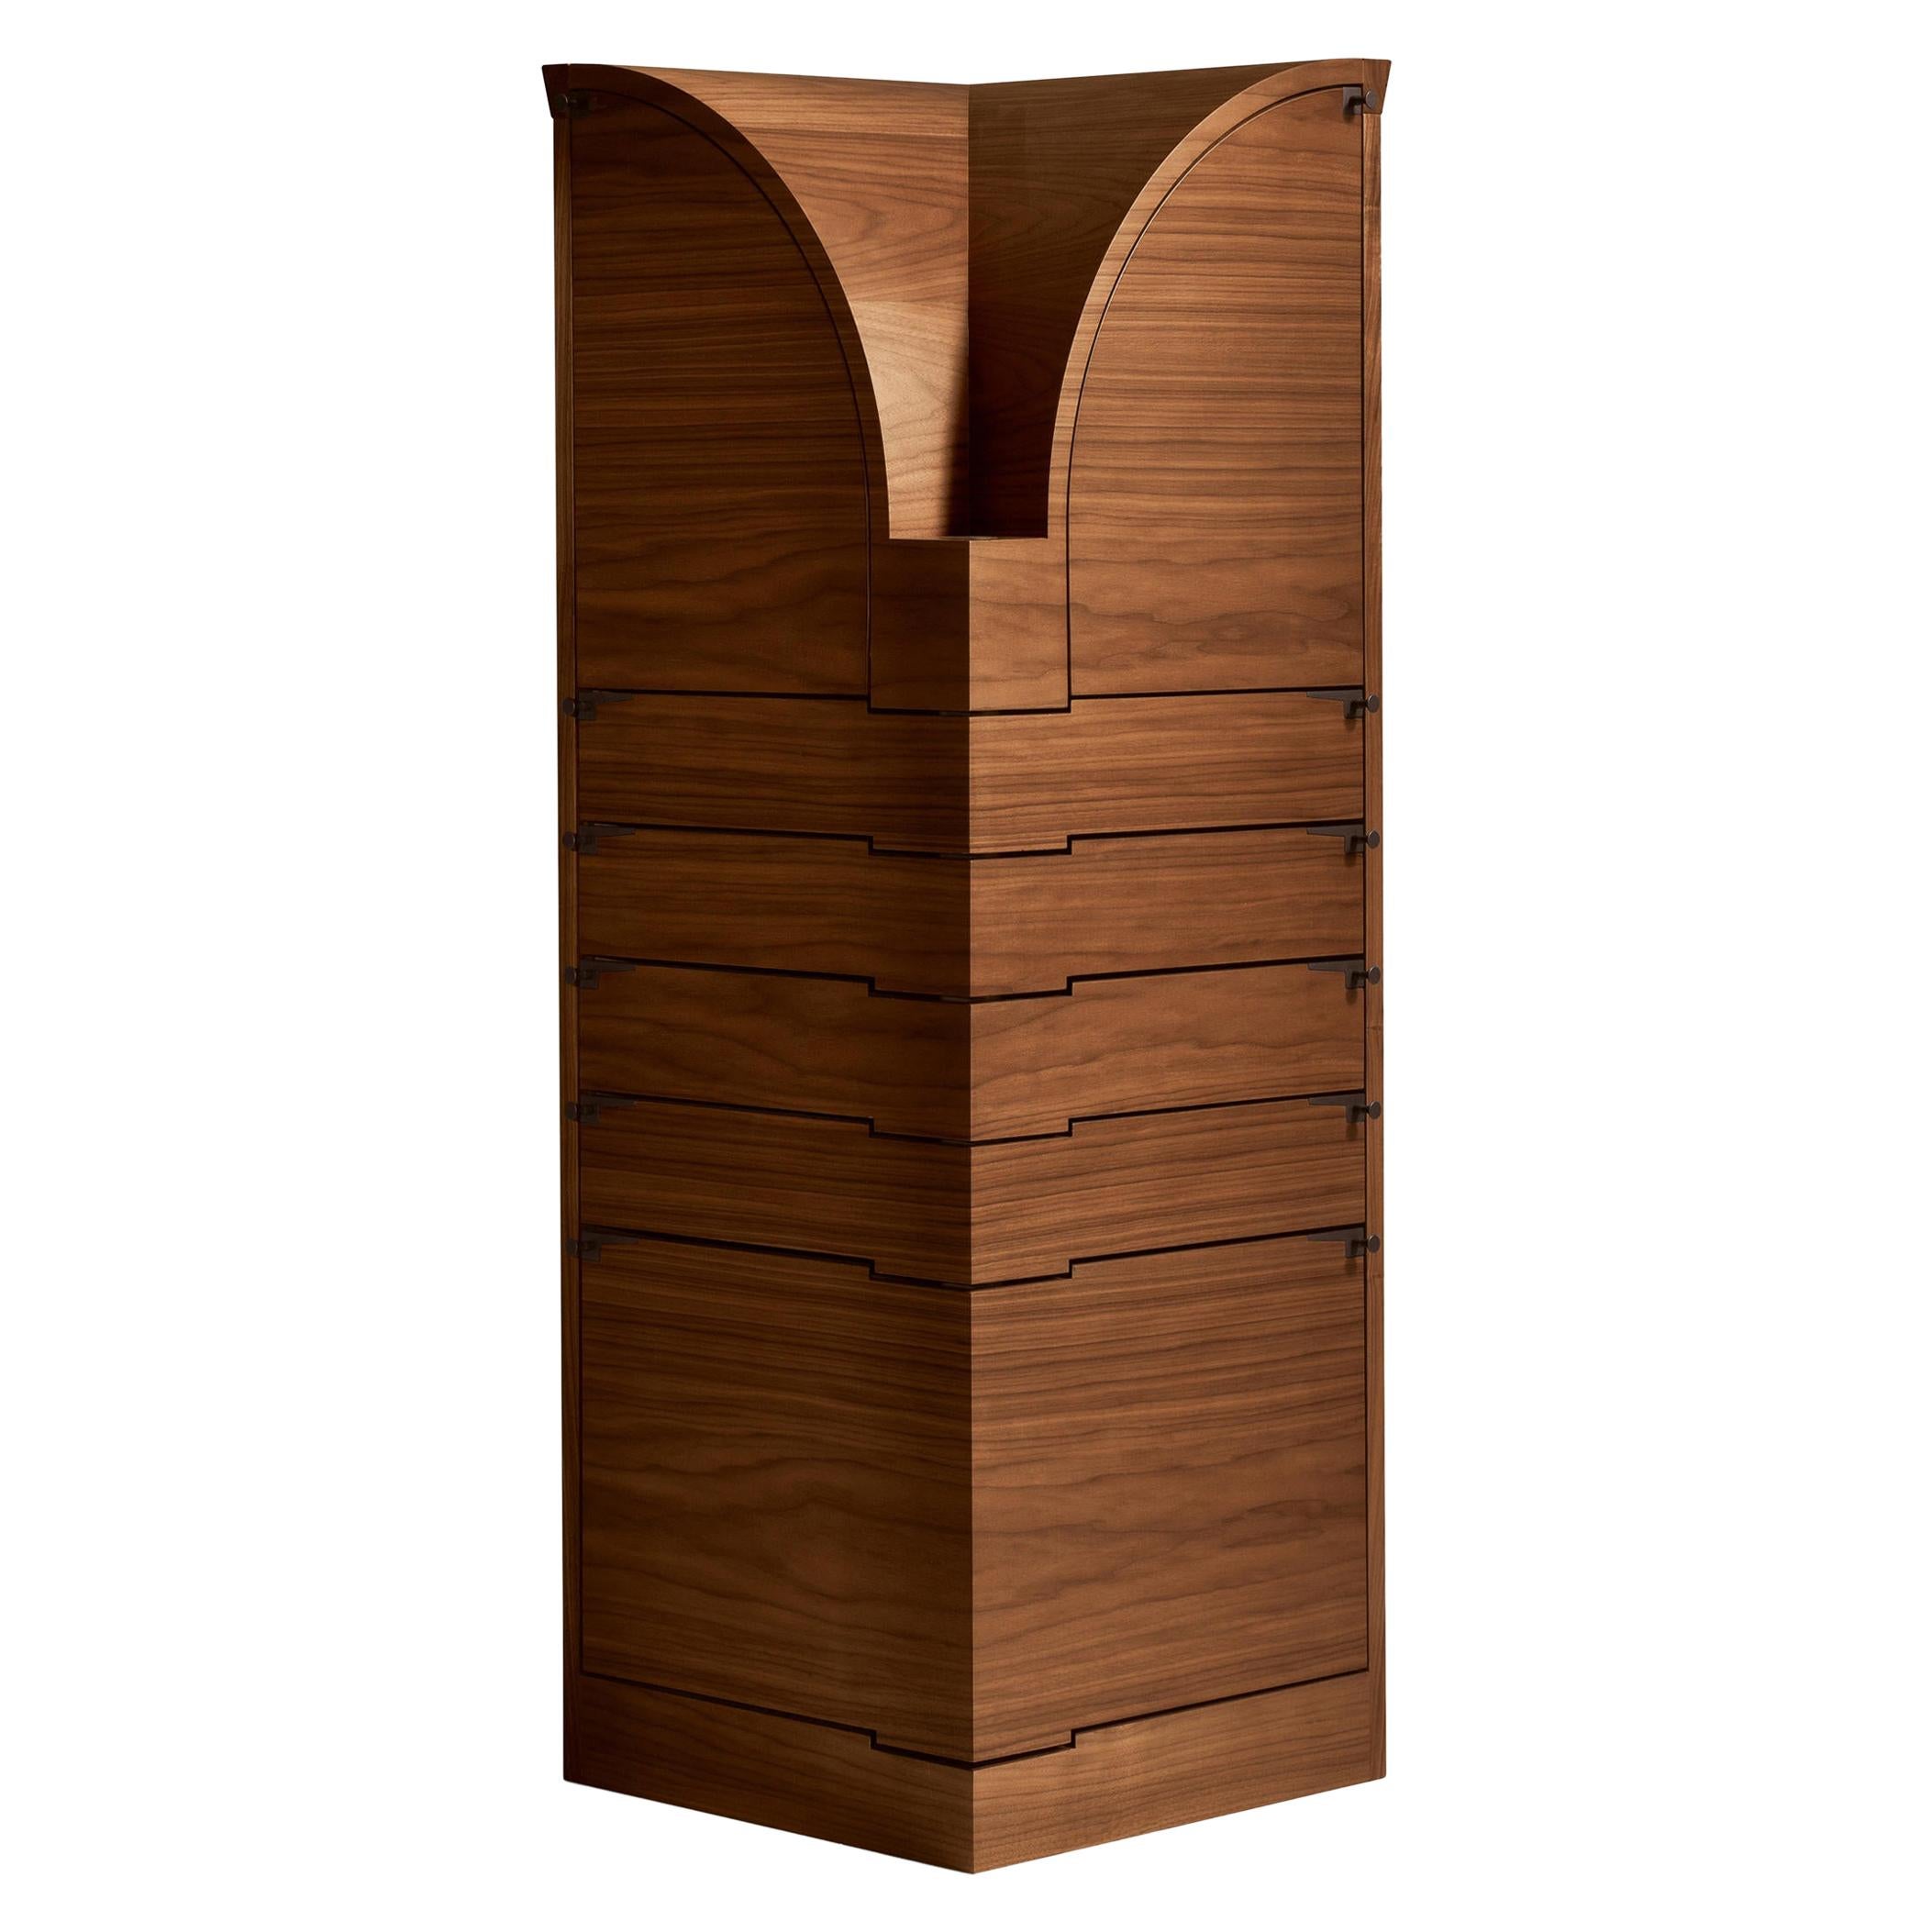 Nyn Corner Cabinet in Walnut by Chi Wing Lo